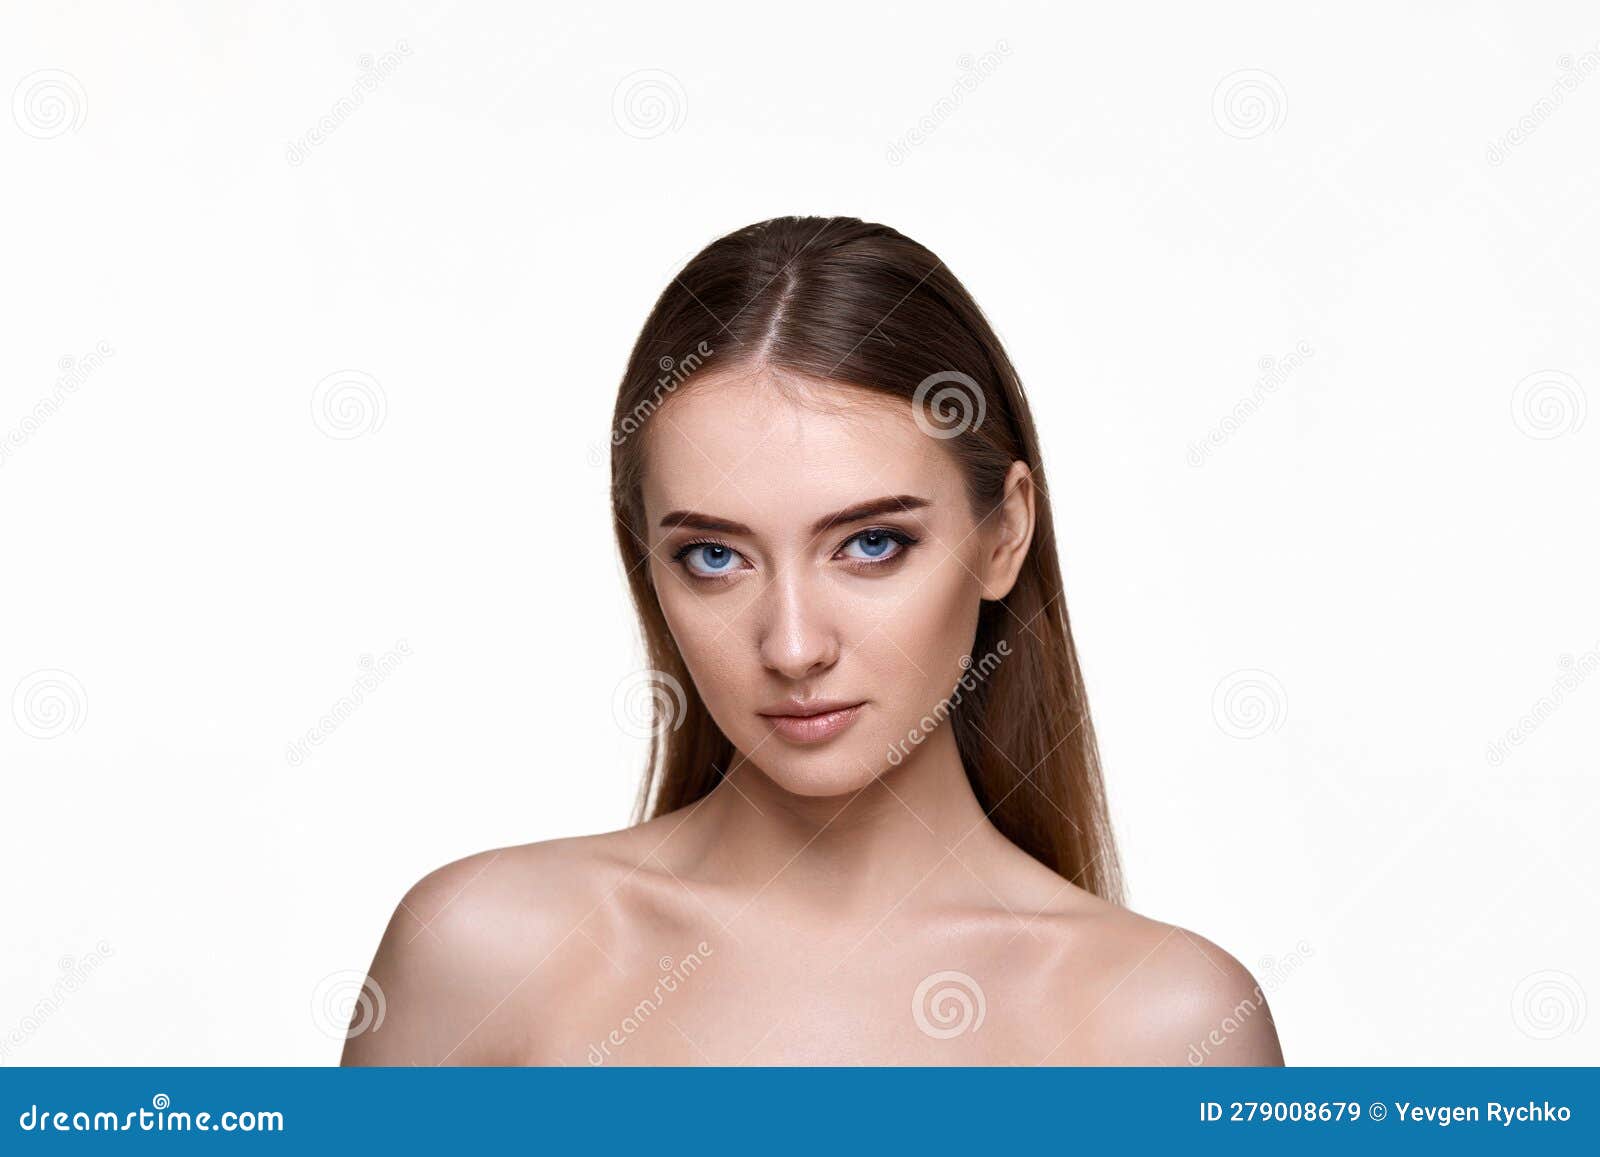 Woman with blue skin and white hair - wide 7